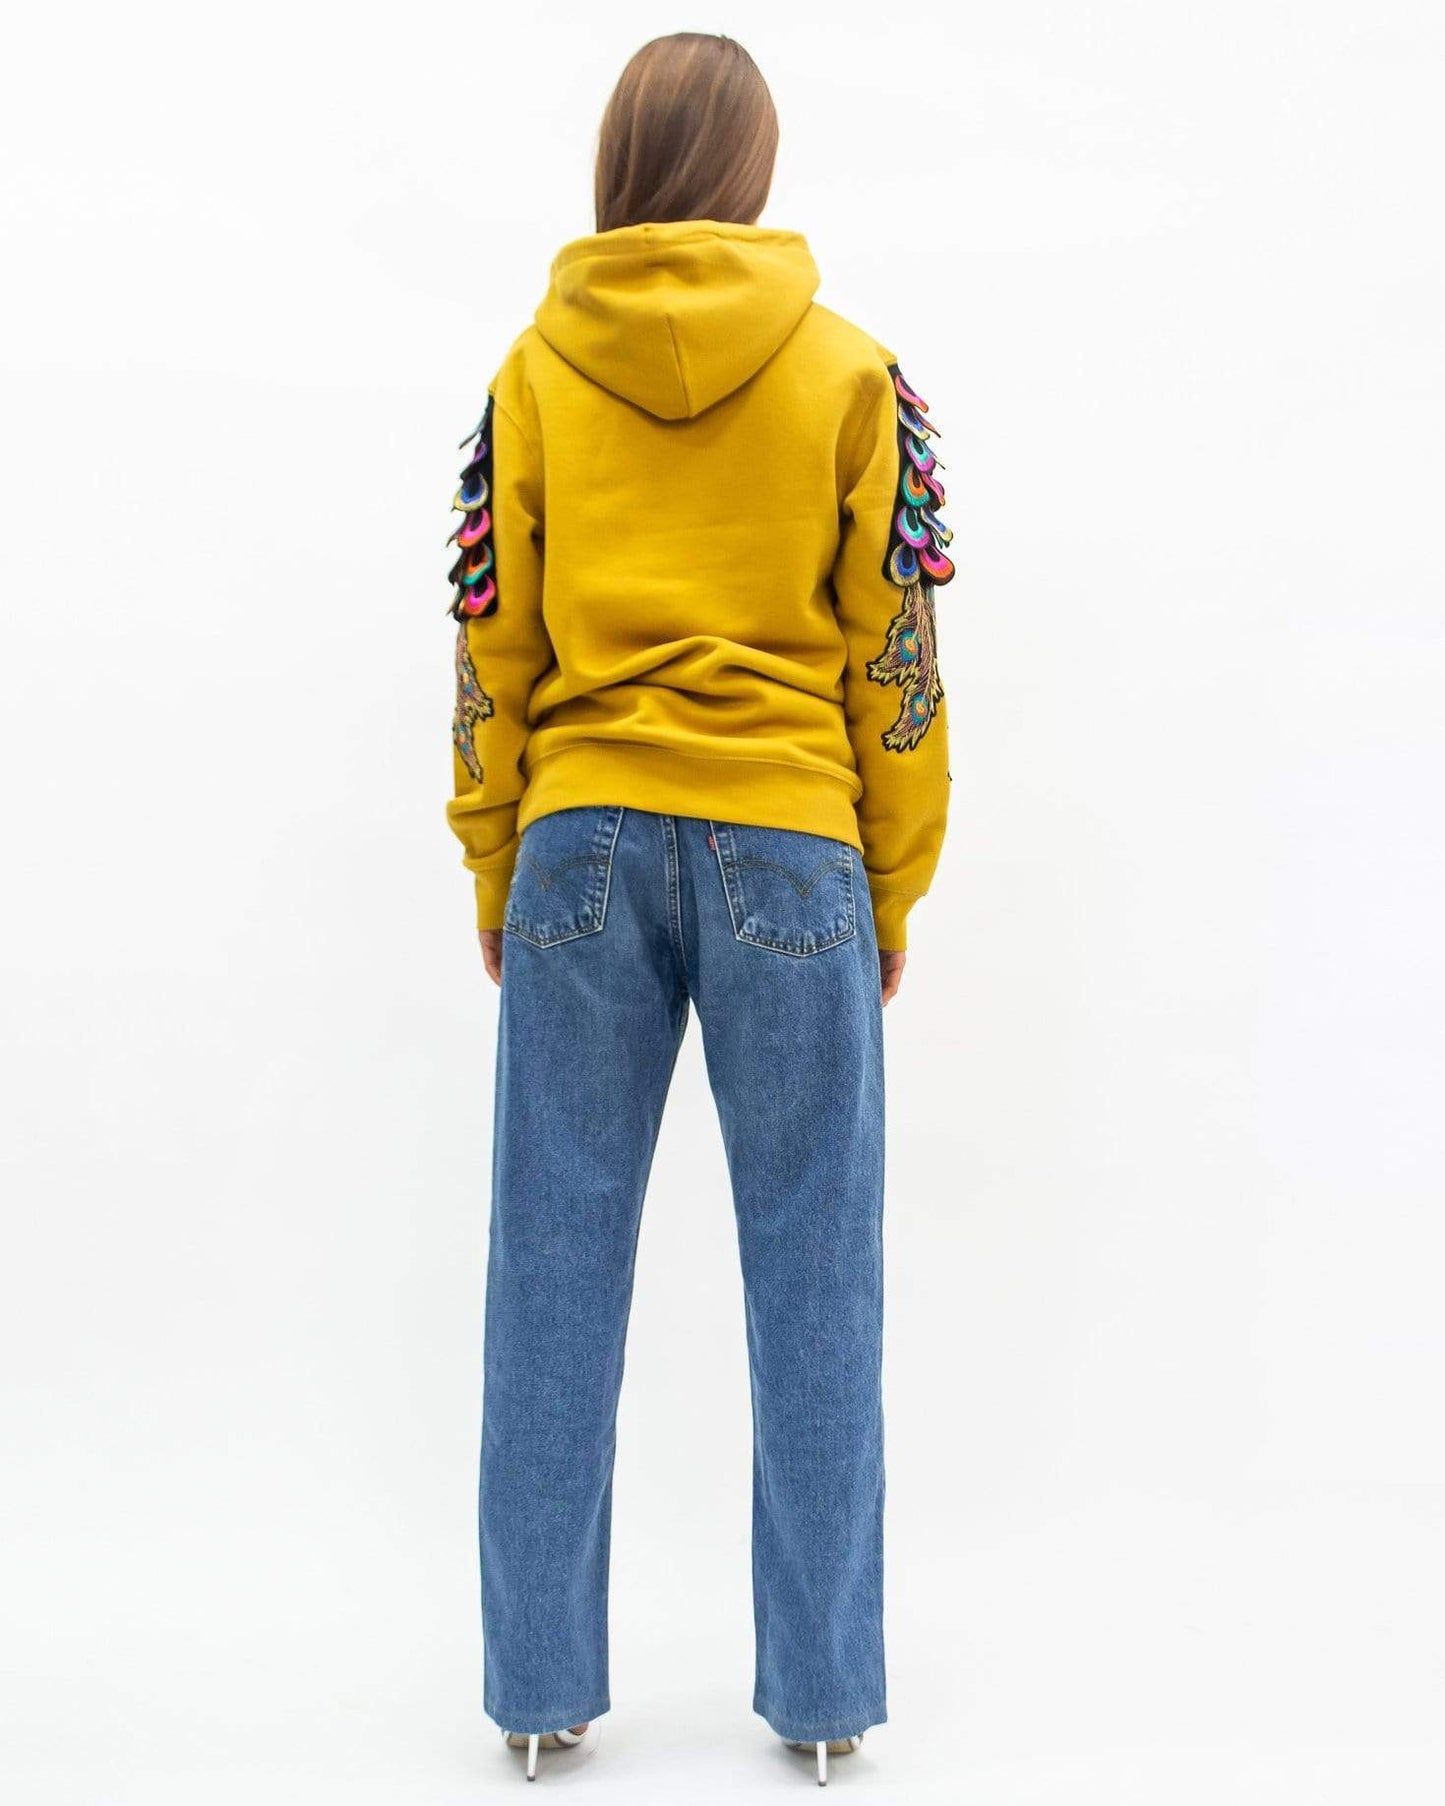 Evergreen - Ochre Psychedelic Peacock Patch Hoodie